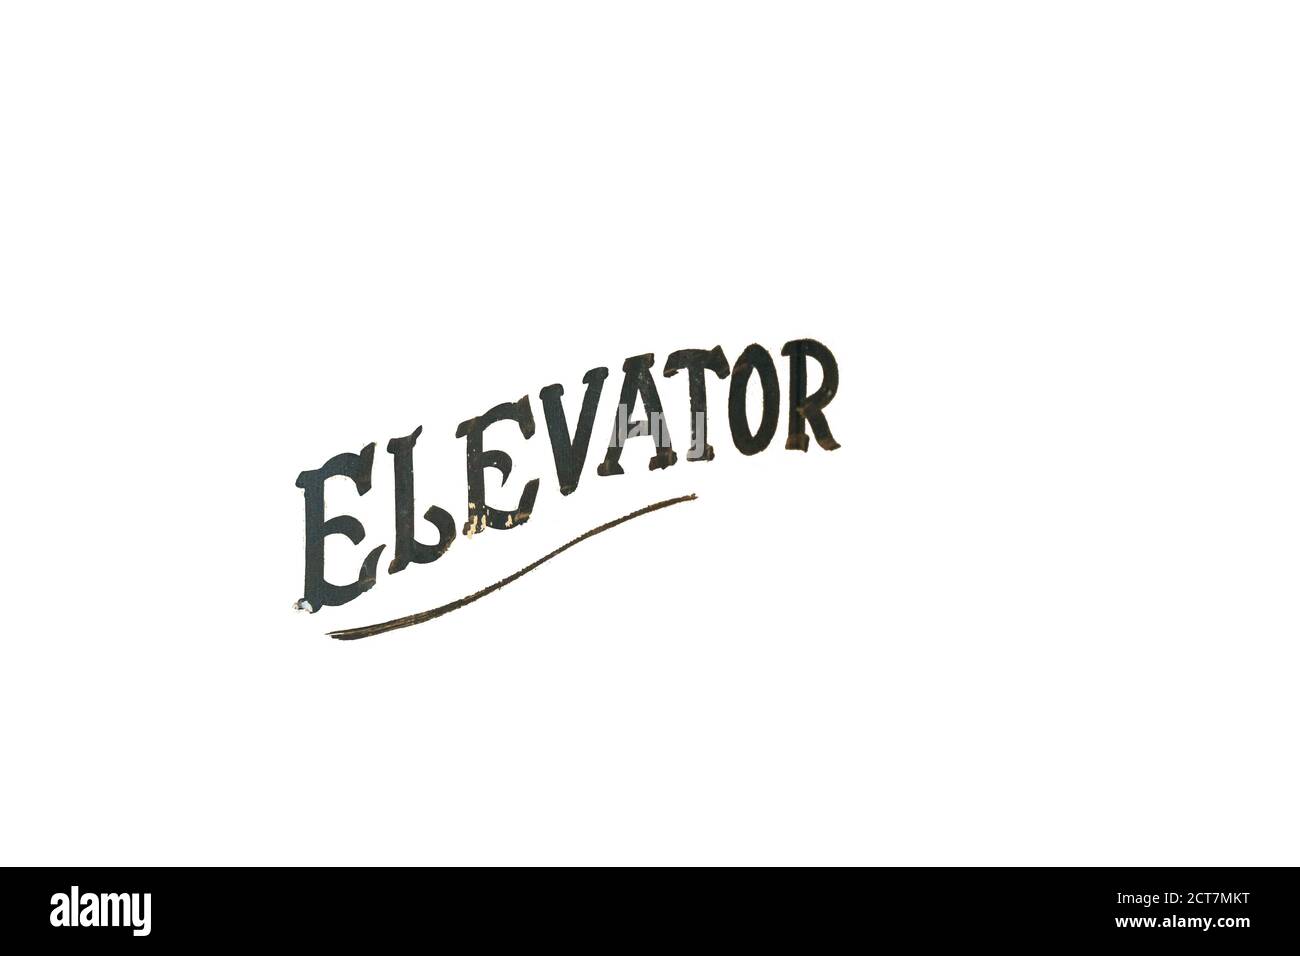 Old Fashioned Text That Says Elevator Stock Photo